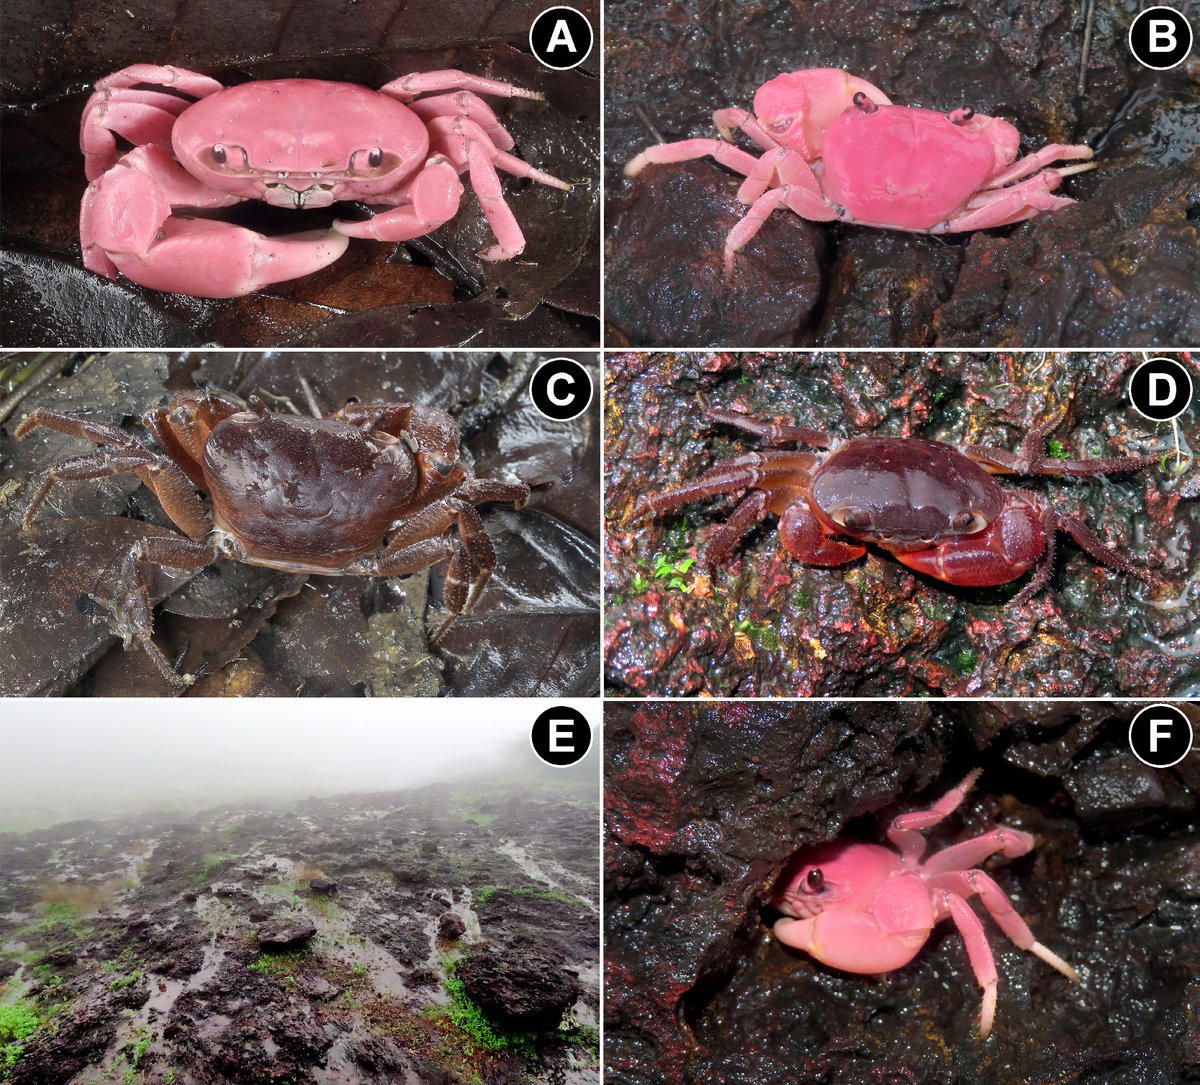 #NewSpeciesAlert #CrabsInTheNews - The “Mr. and Mrs. Ghat #crab”, #𝐺ℎ𝑎𝑡𝑖𝑎𝑛𝑎 𝑑𝑣𝑖𝑟𝑢𝑝𝑎 from the Central #WesternGhats of India. The authors suggest the common name - 'Mr. & Mrs. Ghat crab', due to the difference in colour between the sexes
🔒 bit.ly/3QaWB14